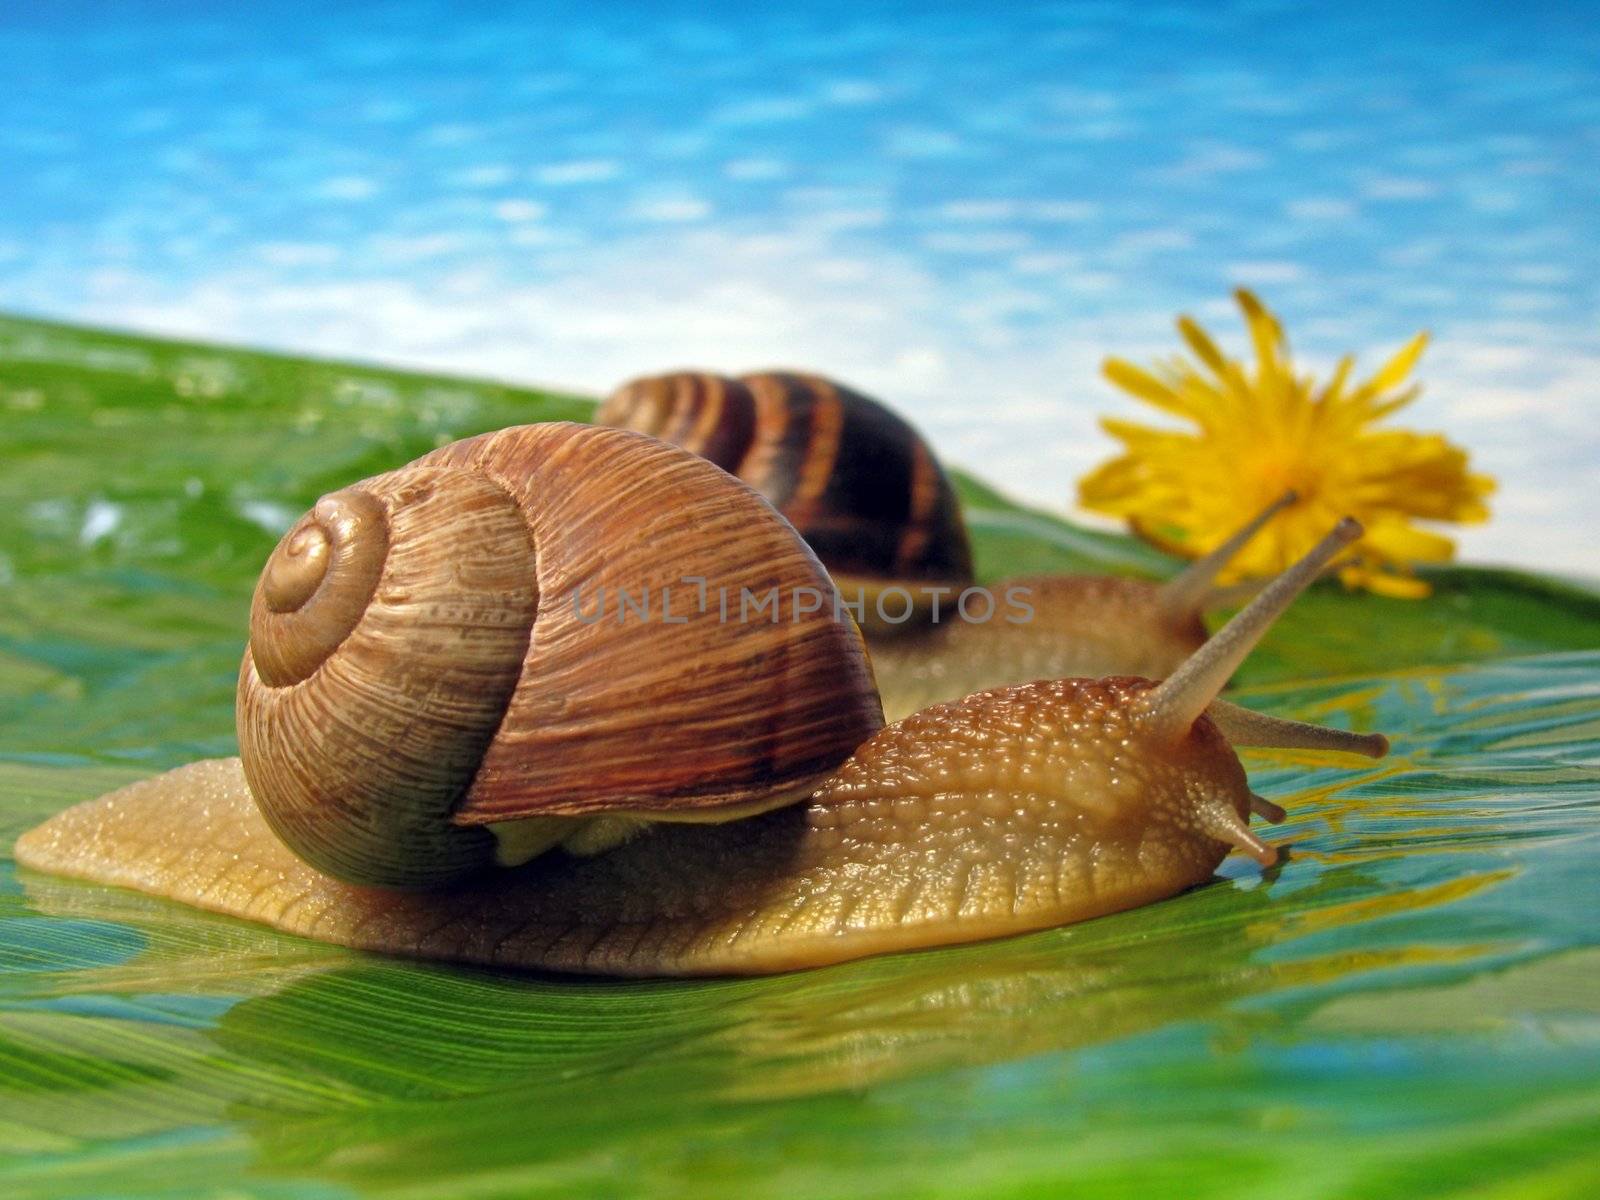 two snails